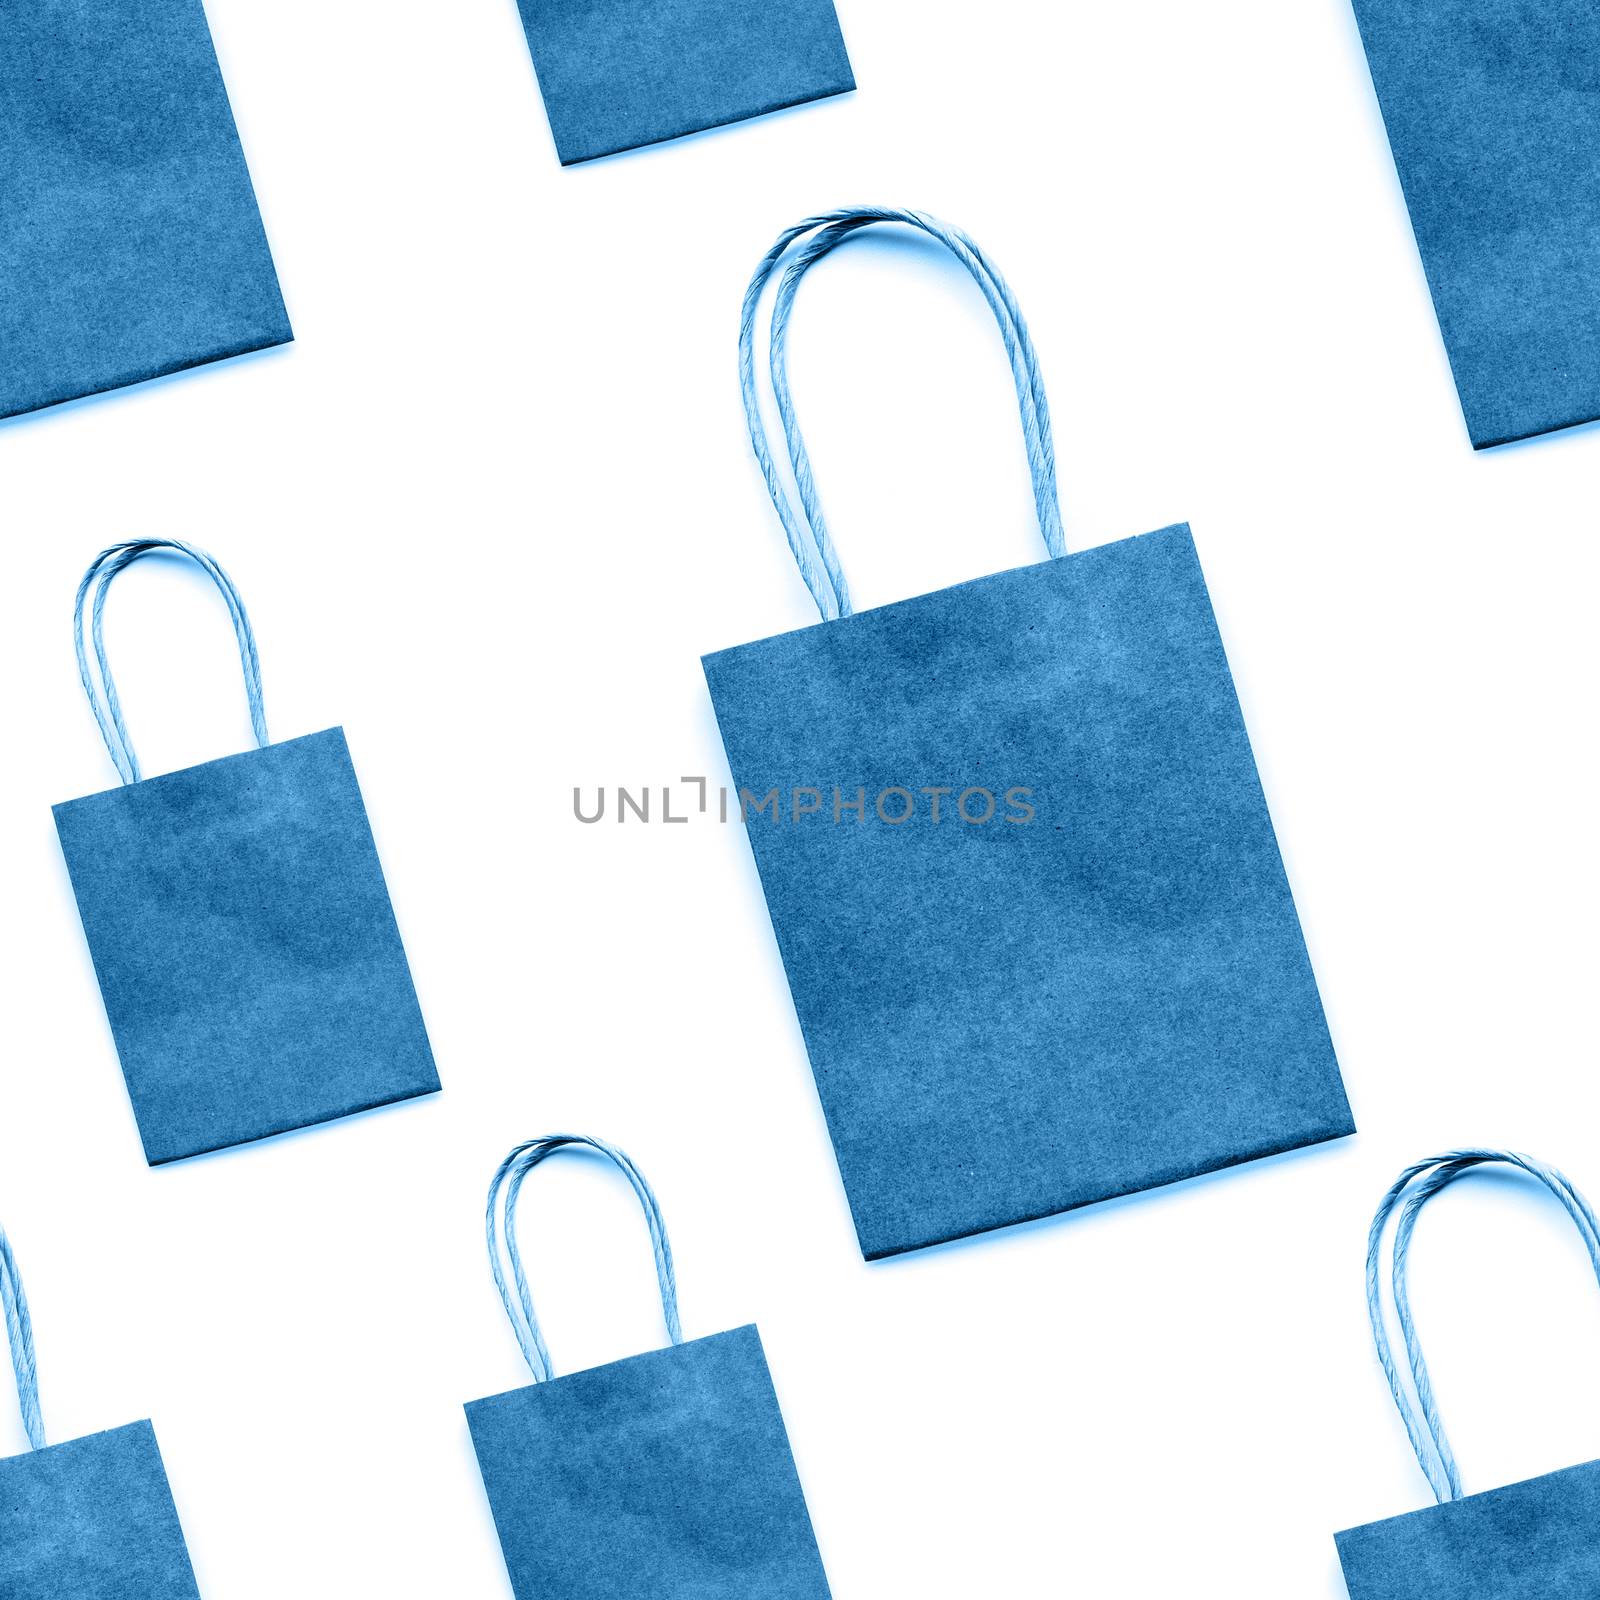 Photo seamless pattern with blue craft paper shopping bags. Zero waste lifestyle. Copy space.